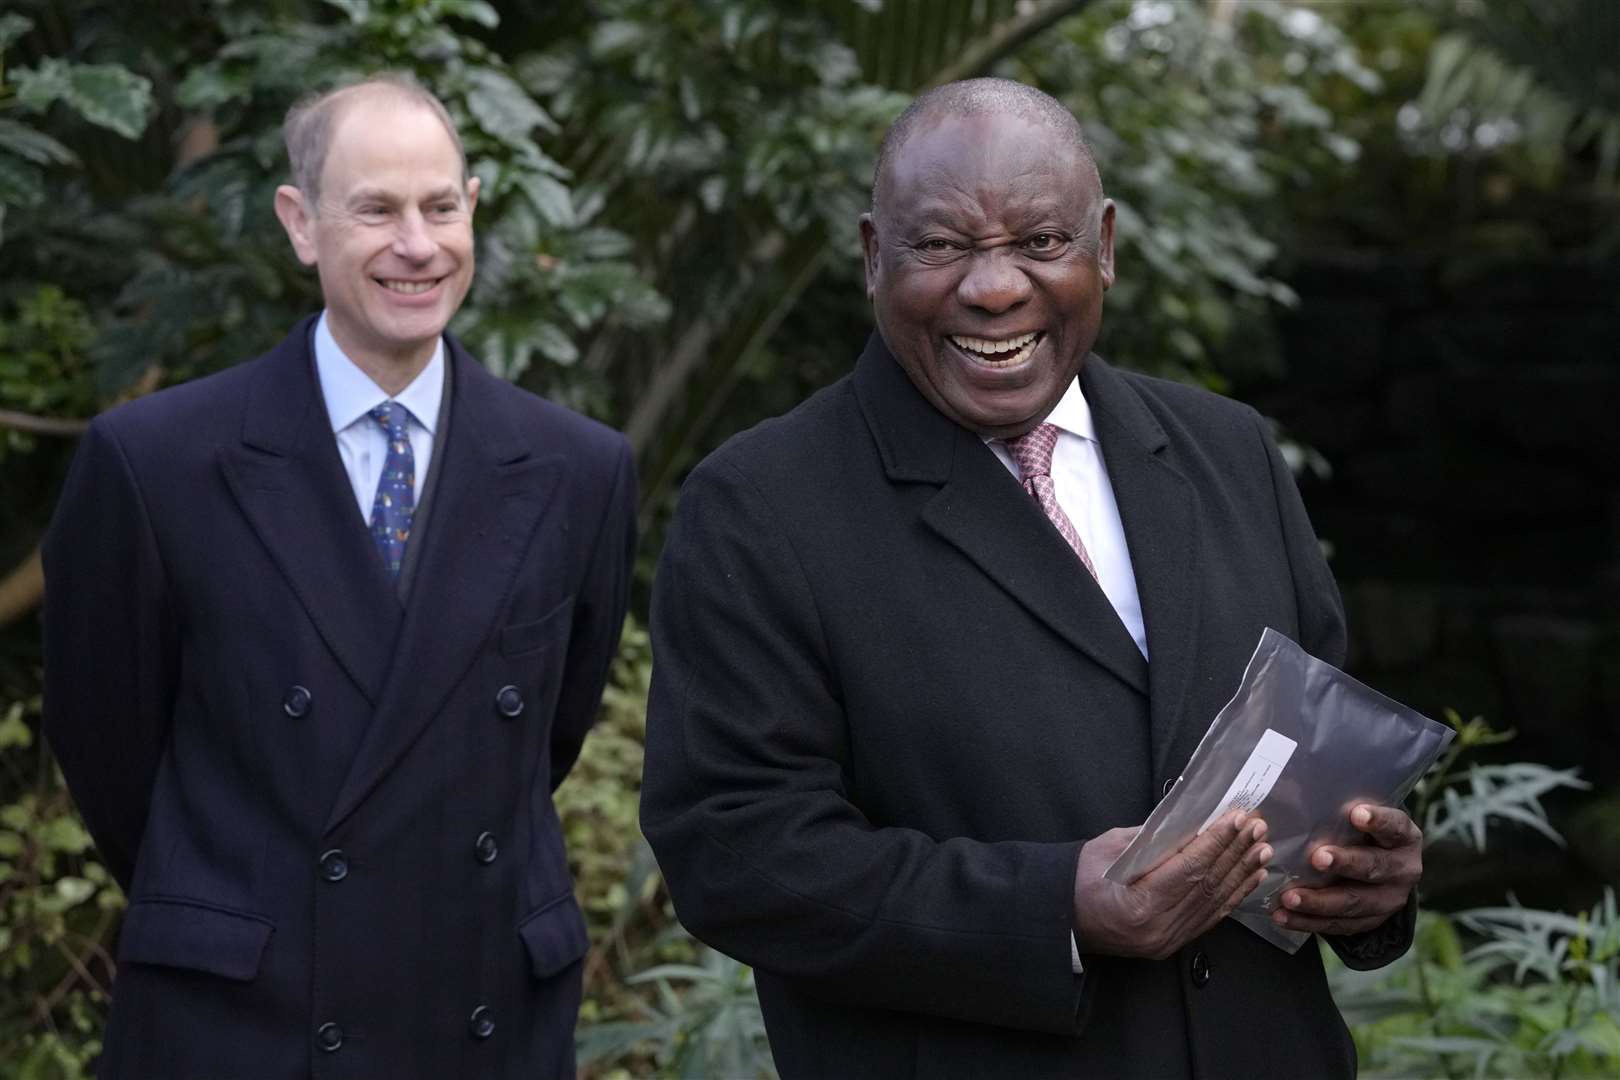 The president was presented with seeds from a South African flower which has been dwindling in numbers (Kirsty Wigglesworth/PA)